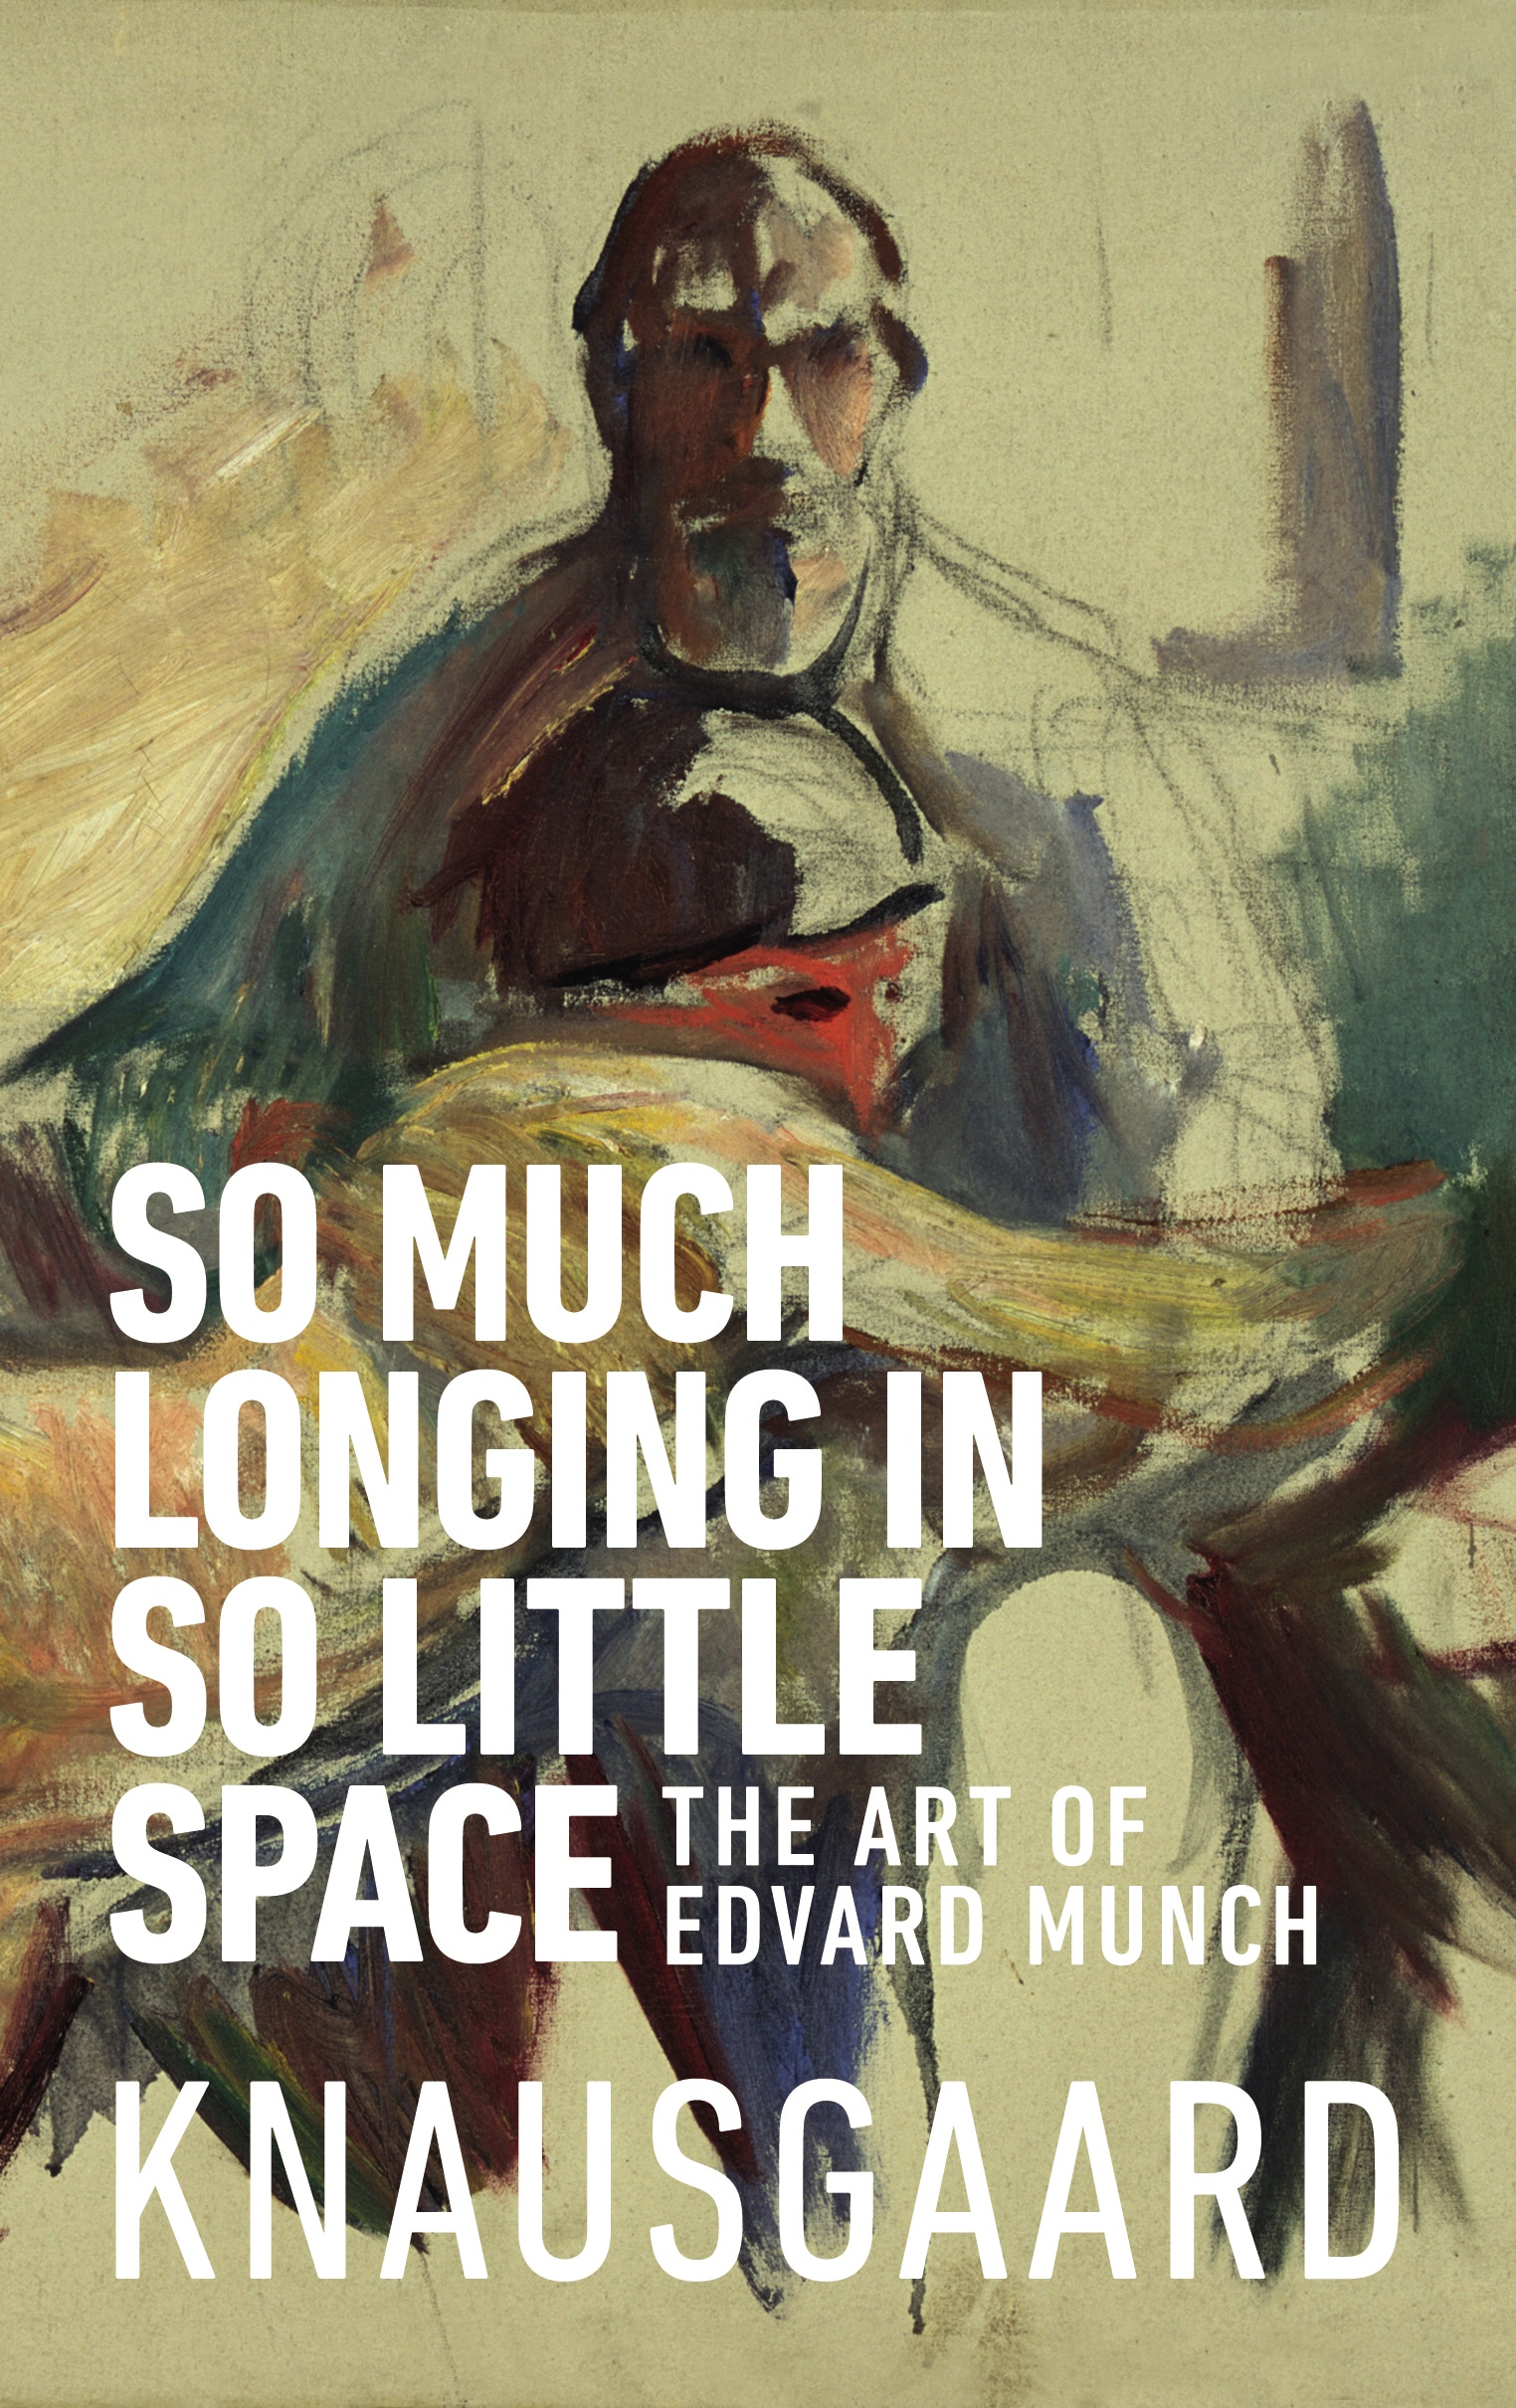 Book “So Much Longing in So Little Space” by Karl Ove Knausgaard — March 28, 2019